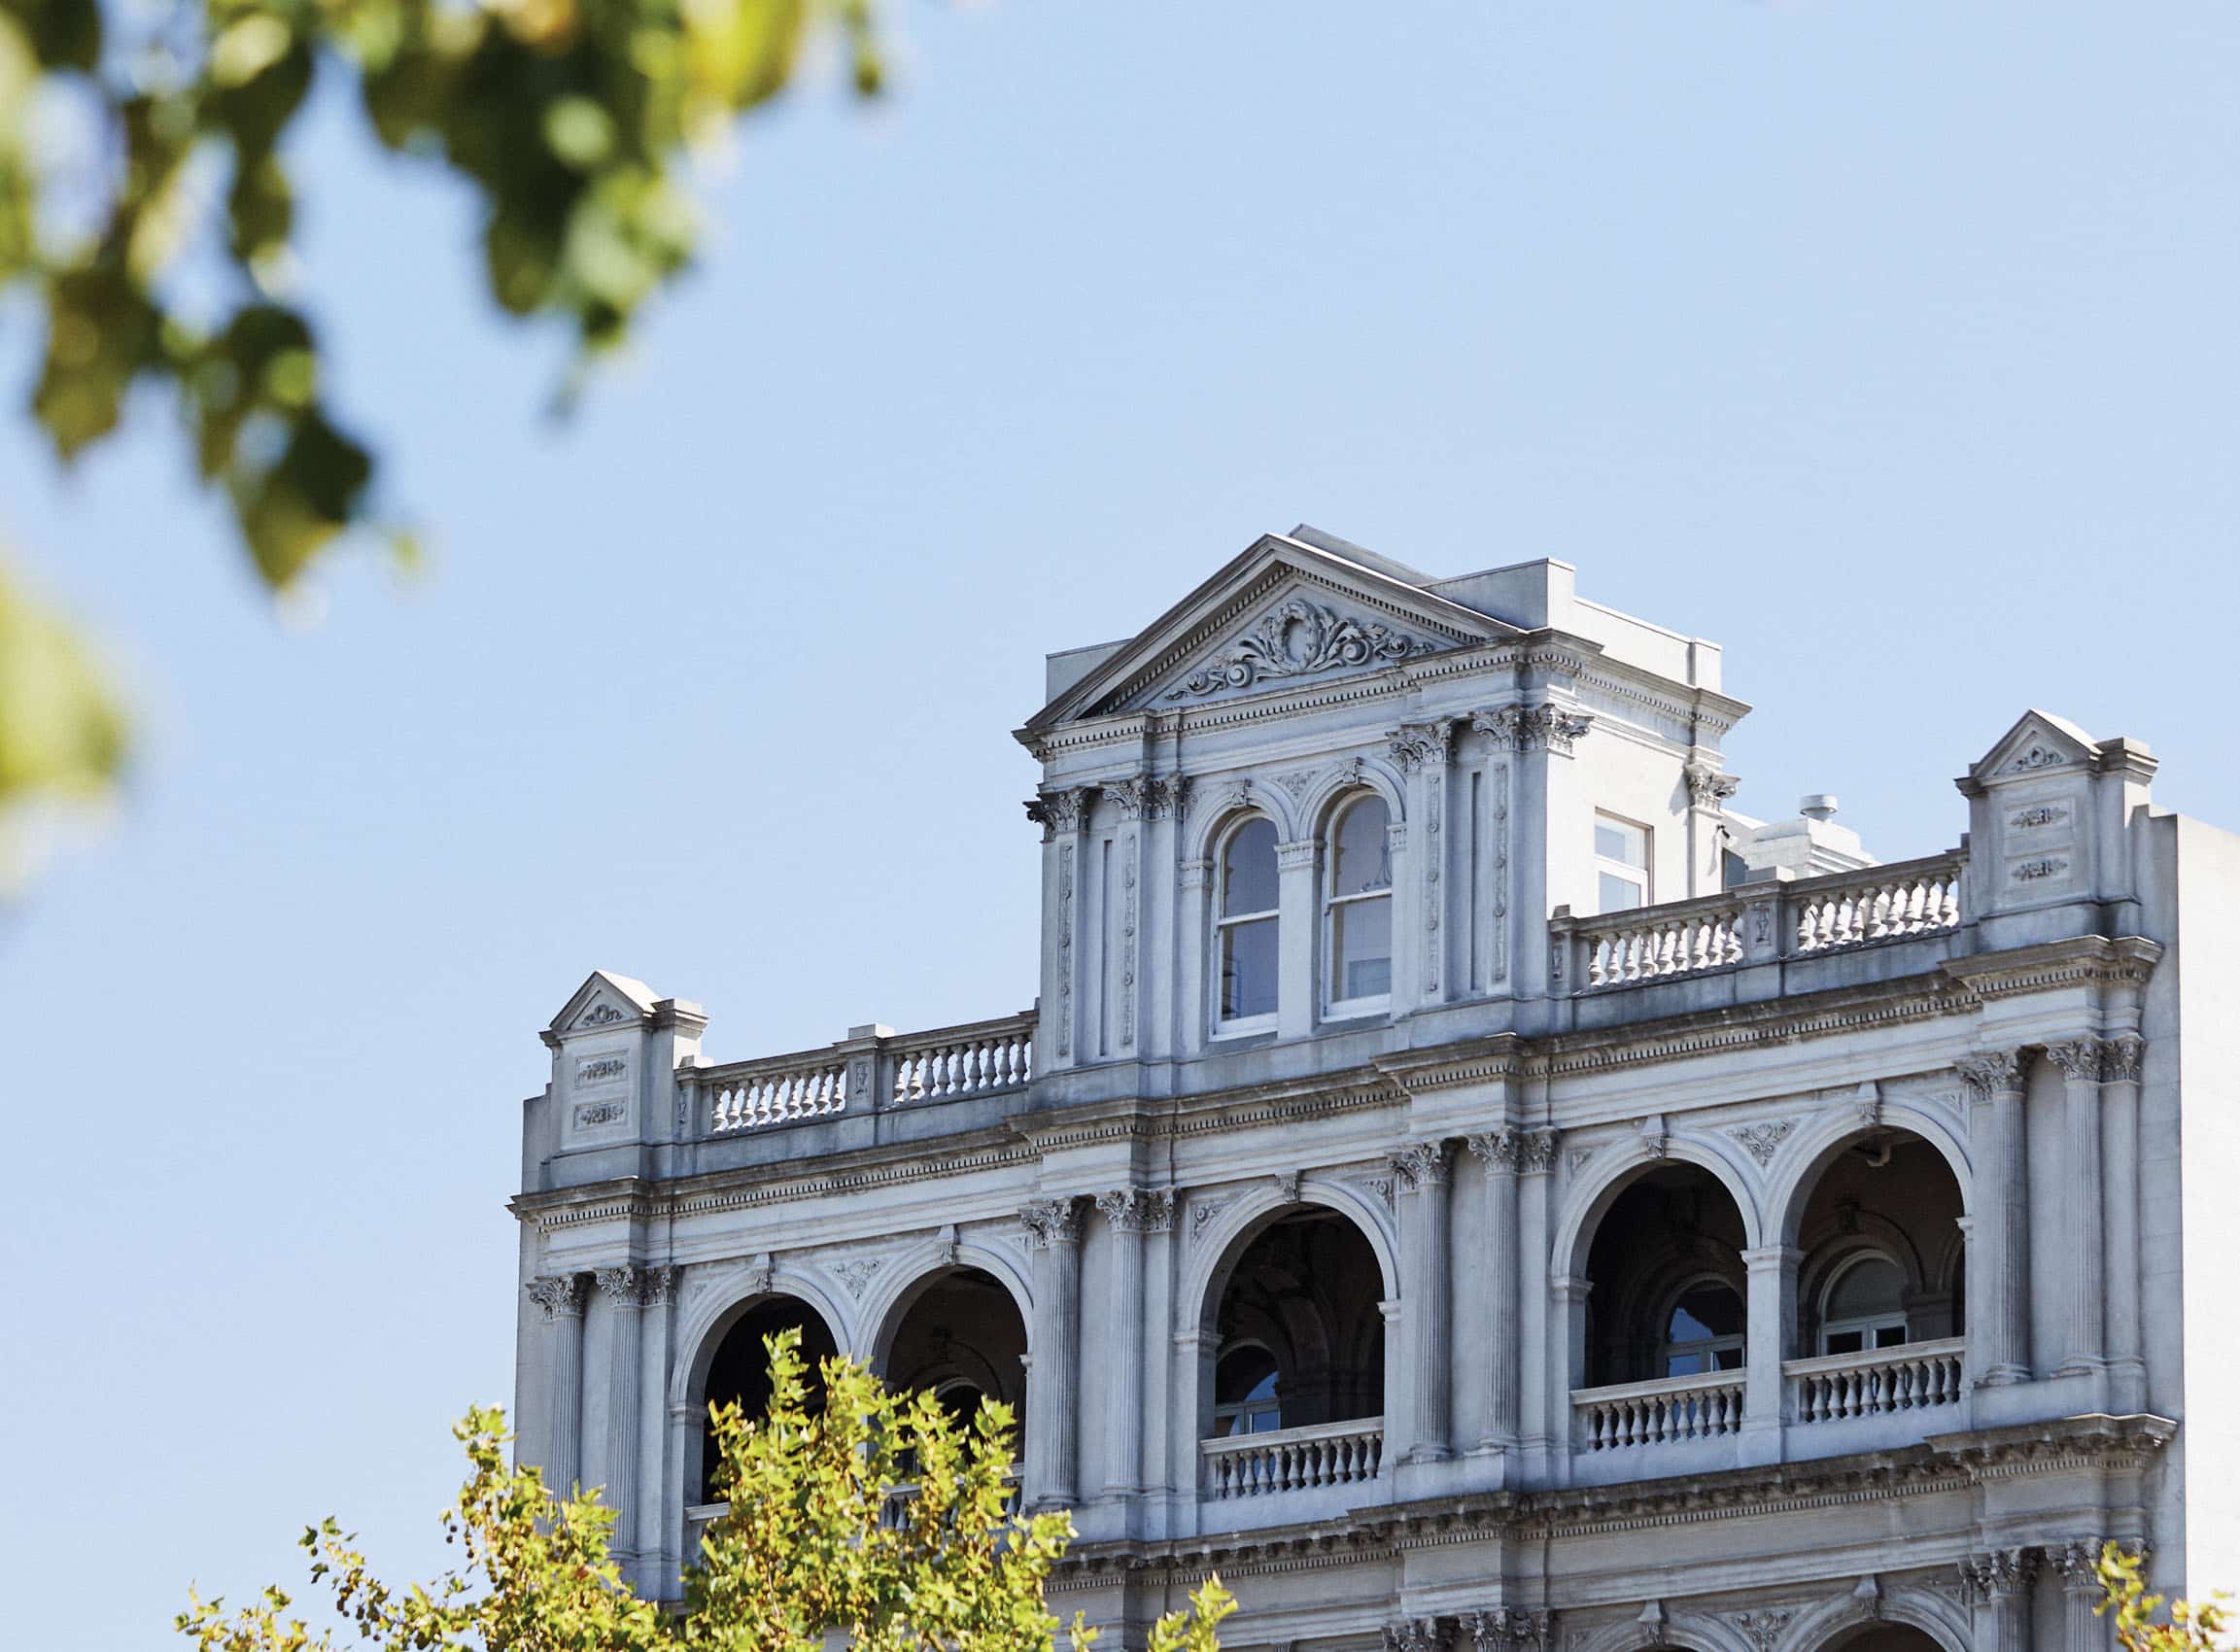 Classic architecture and iconic buildings in historic Albert Park.